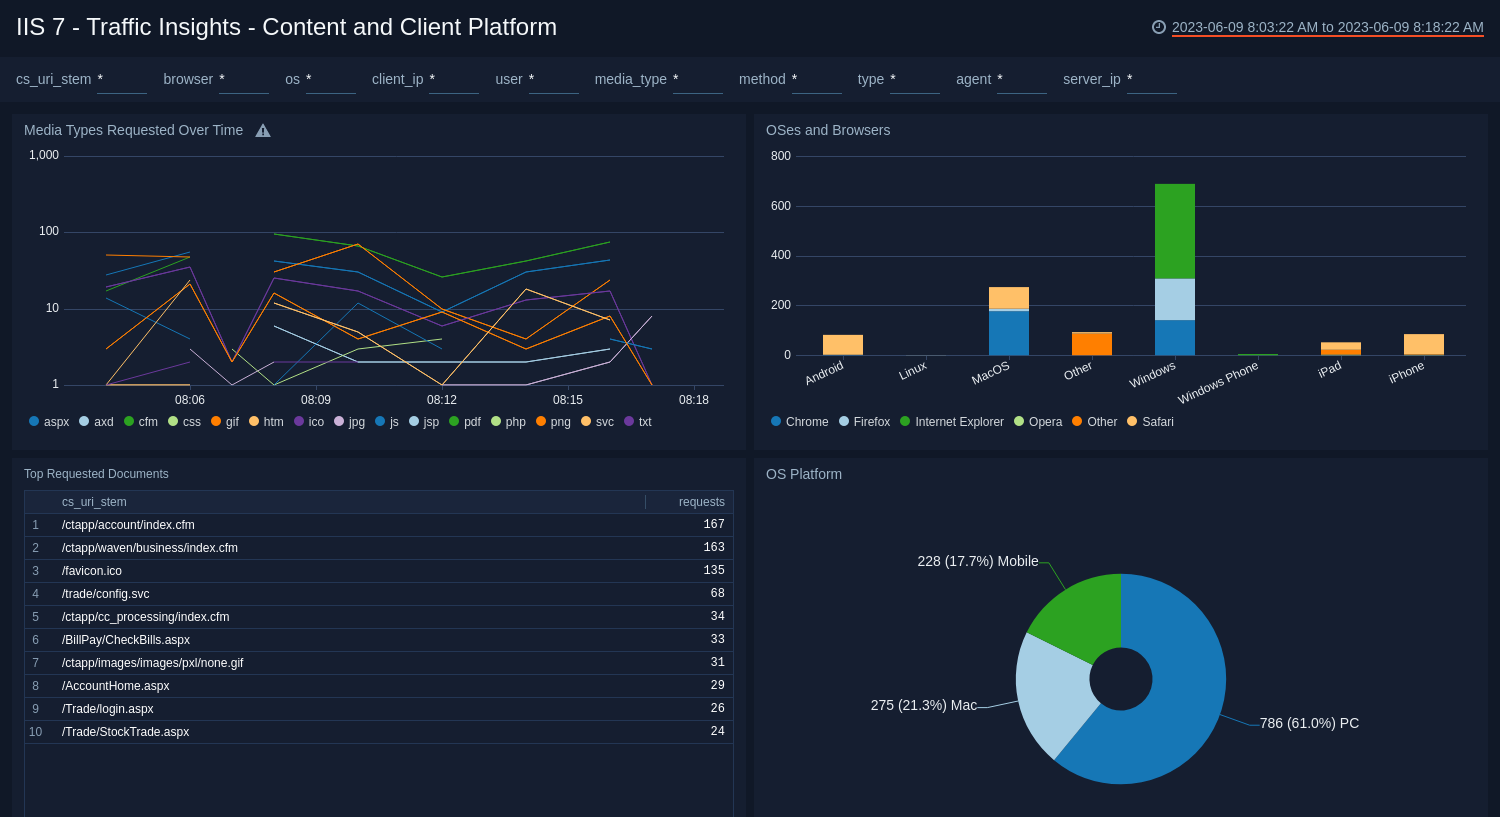 Traffic Insights - Content and Client Platform